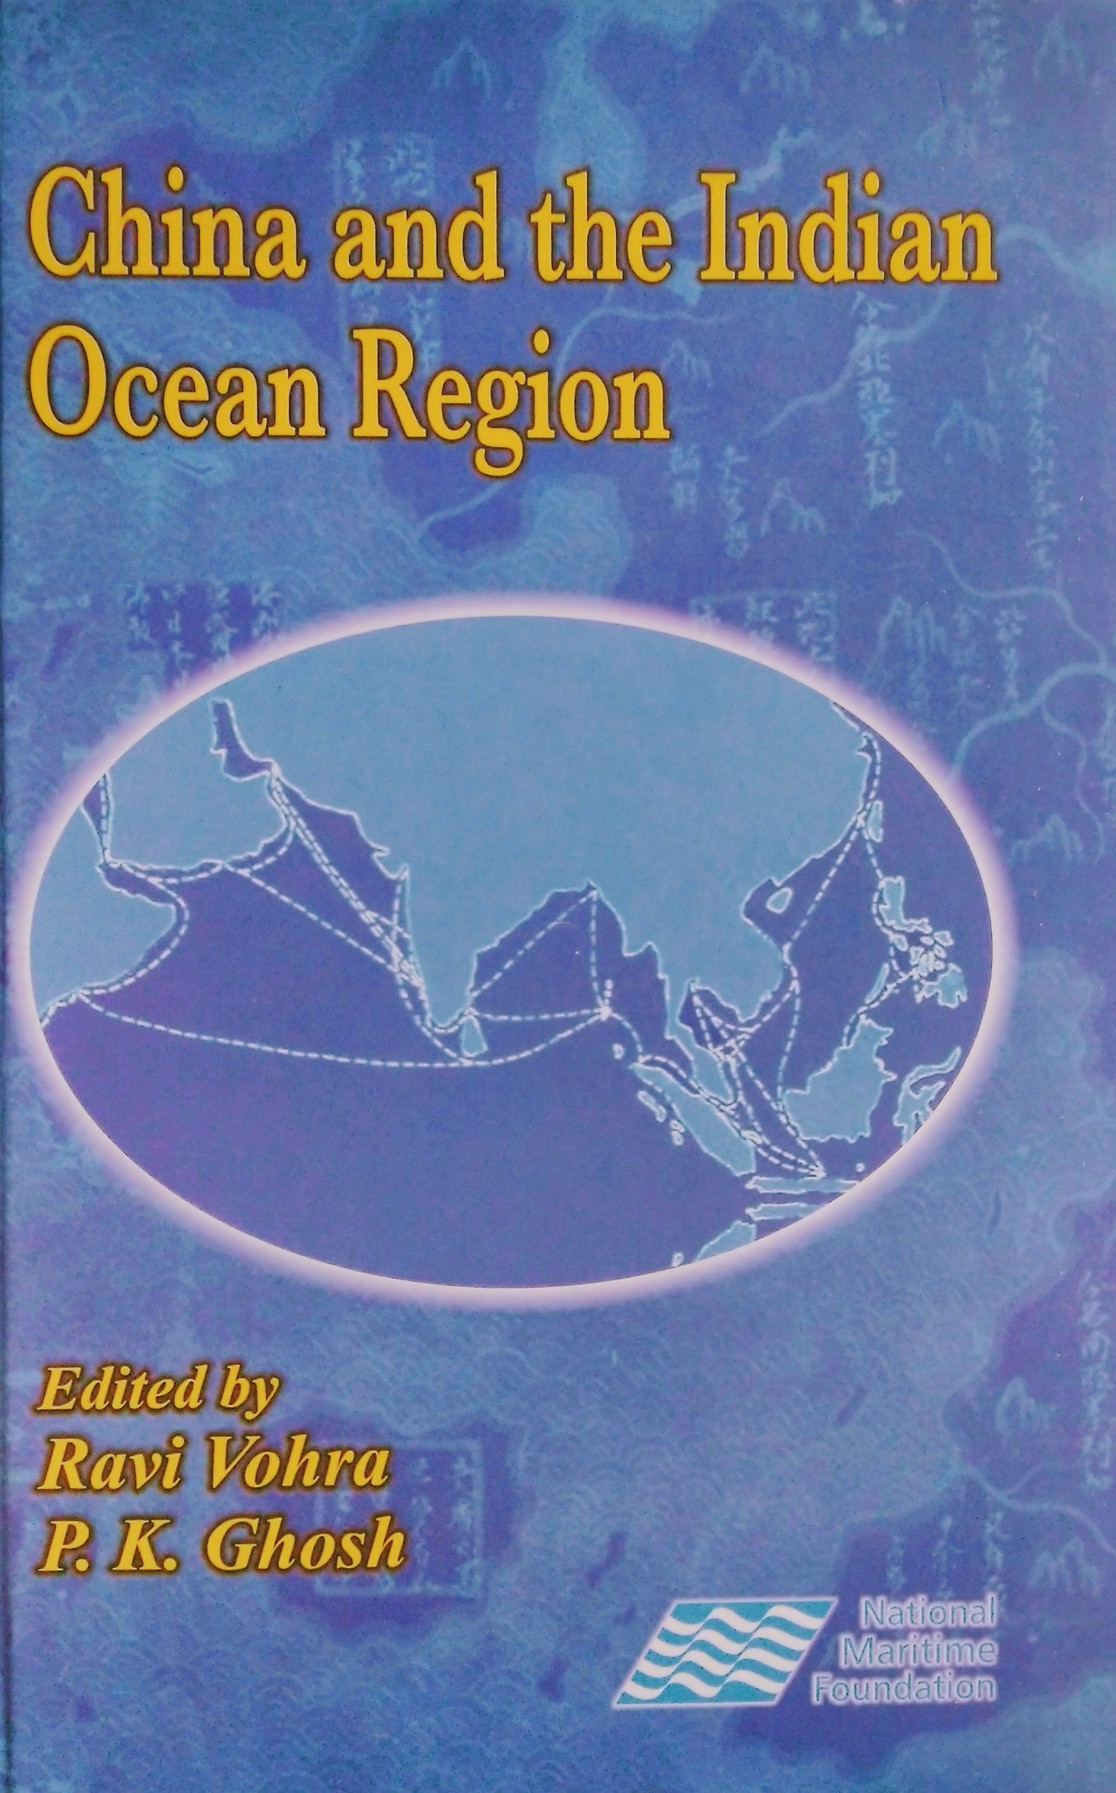 CHINA AND THE INDIAN OCEAN REGION